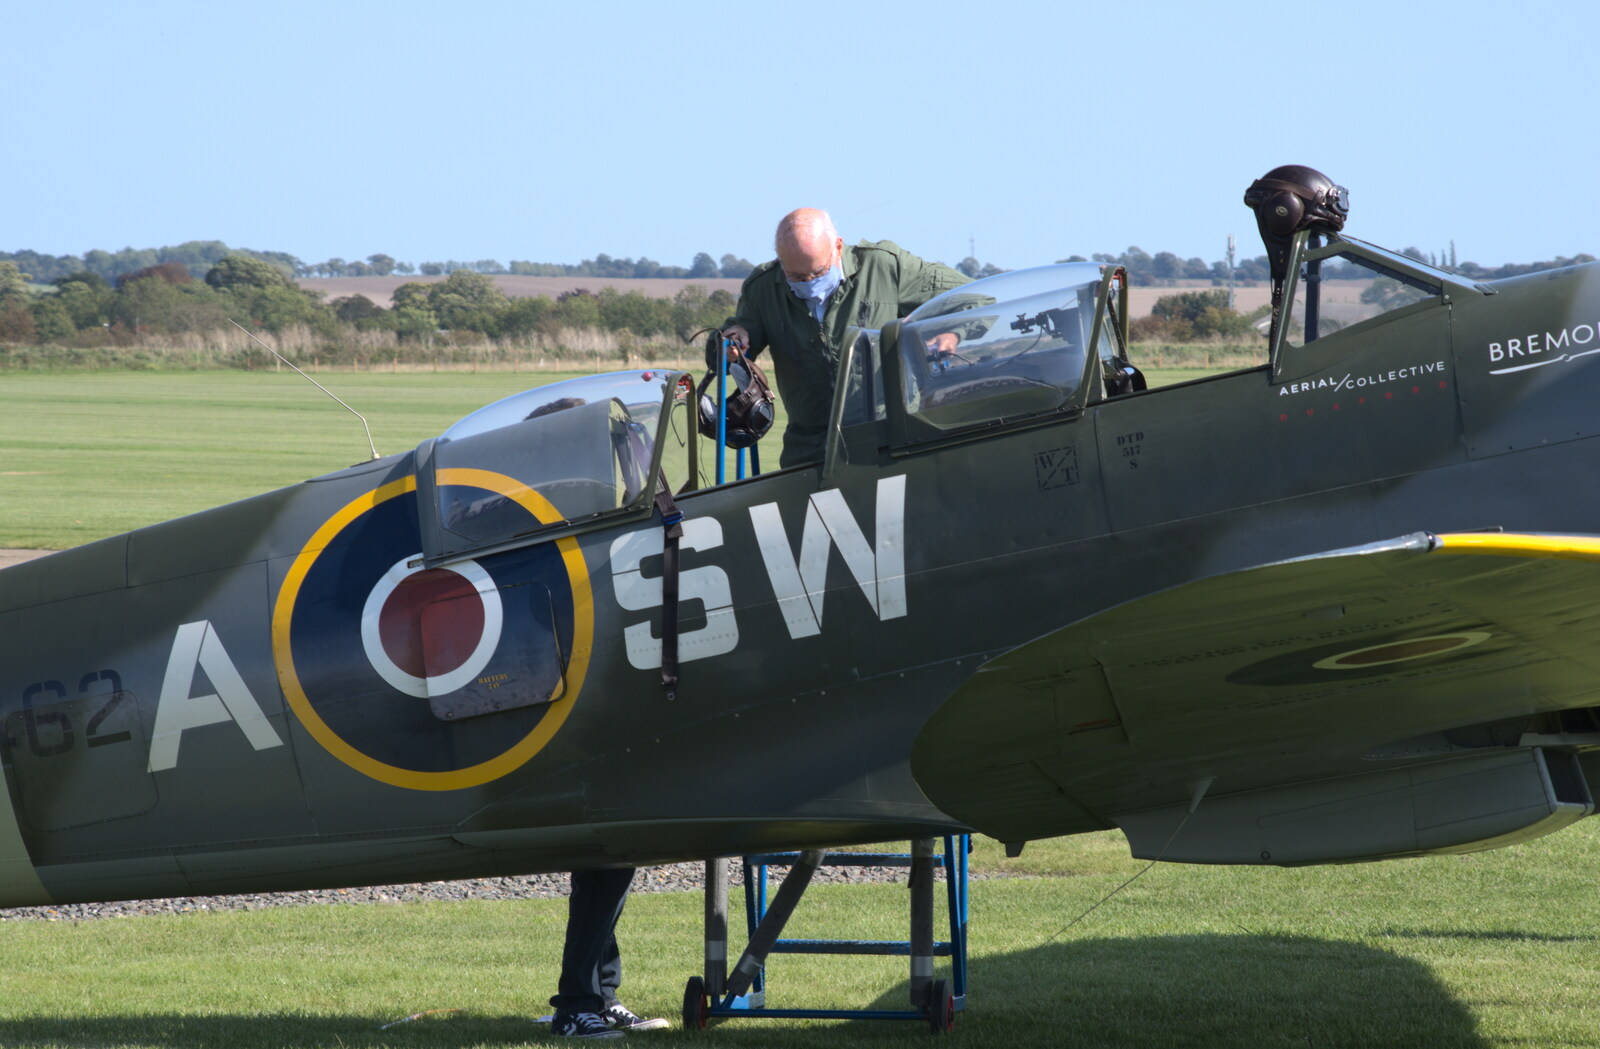 A 90-something bloke climbs in to the Spitfire from The Duxford Dash, IWM Duxford, Cambridge - 13th September 2020